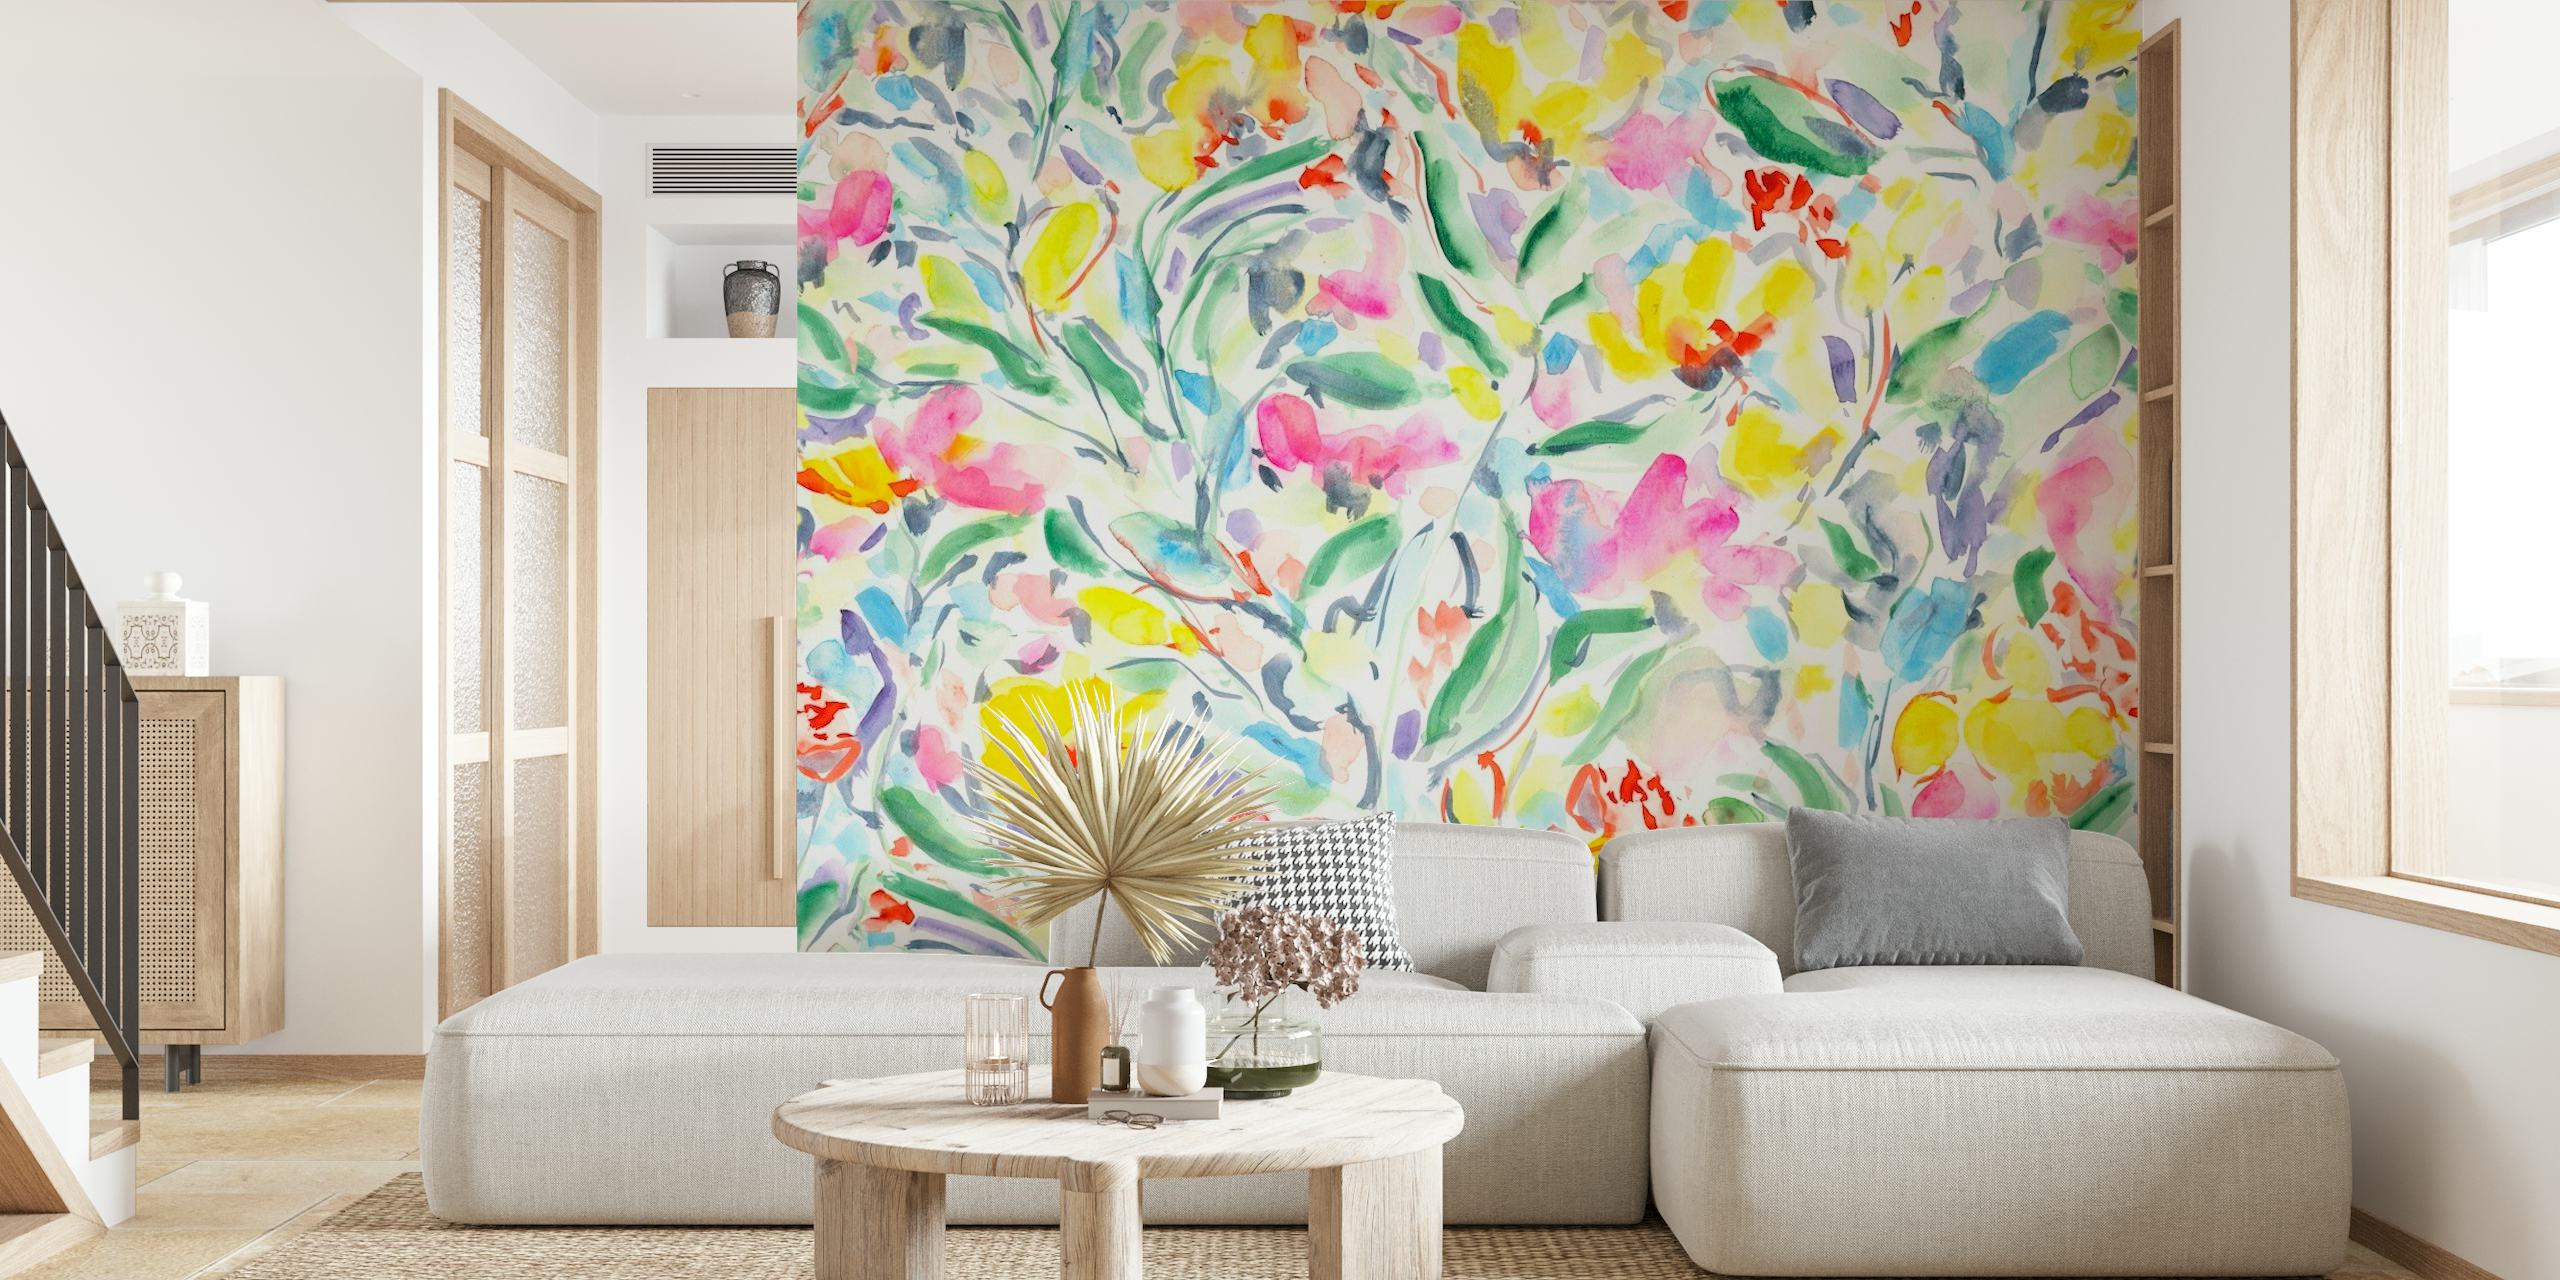 Otherworldly Botanical Abstract Floral behang